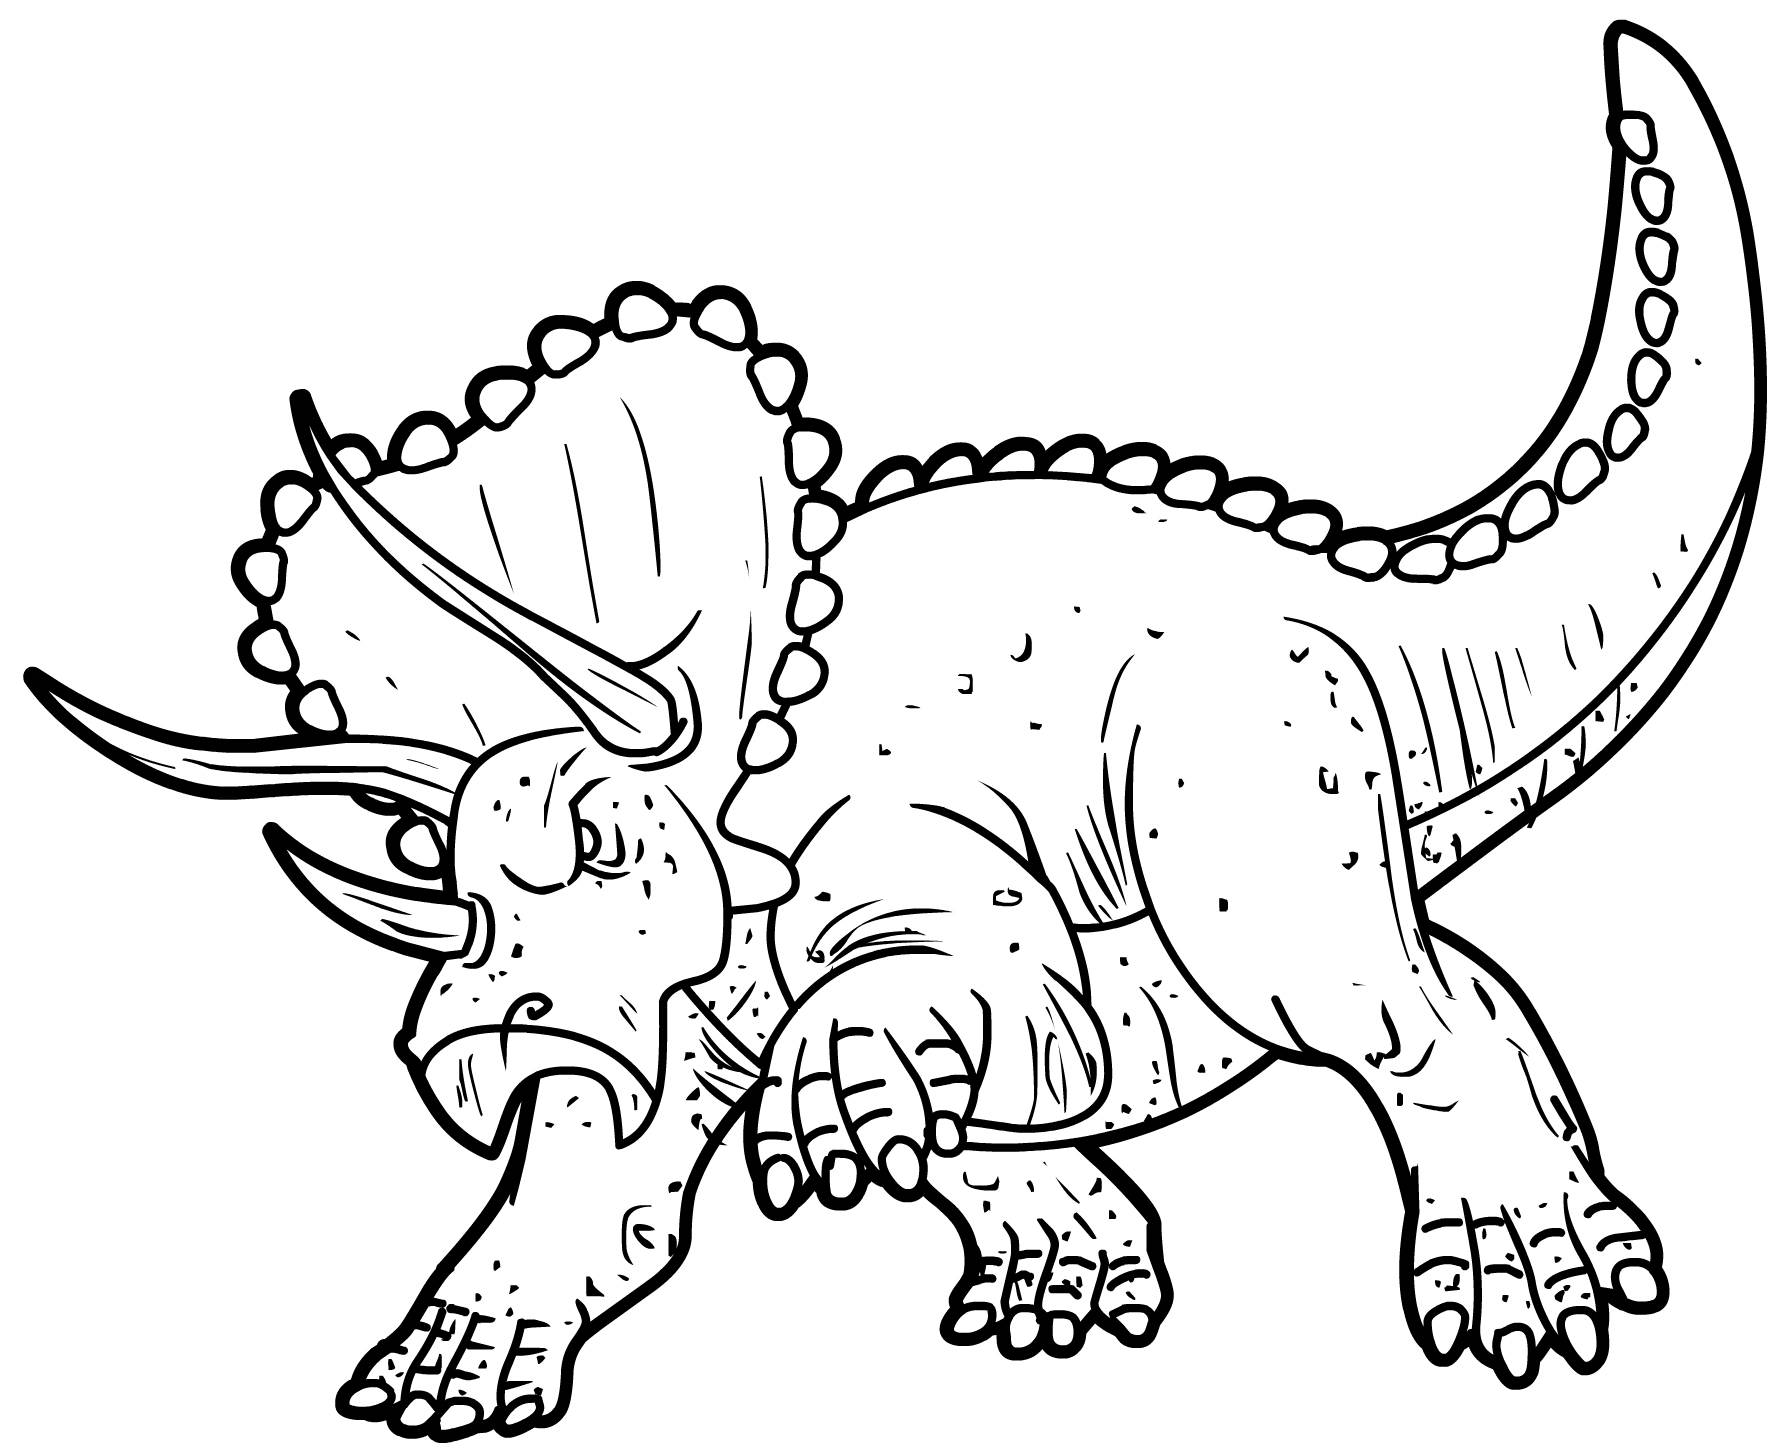 triceratops coloring pages to print